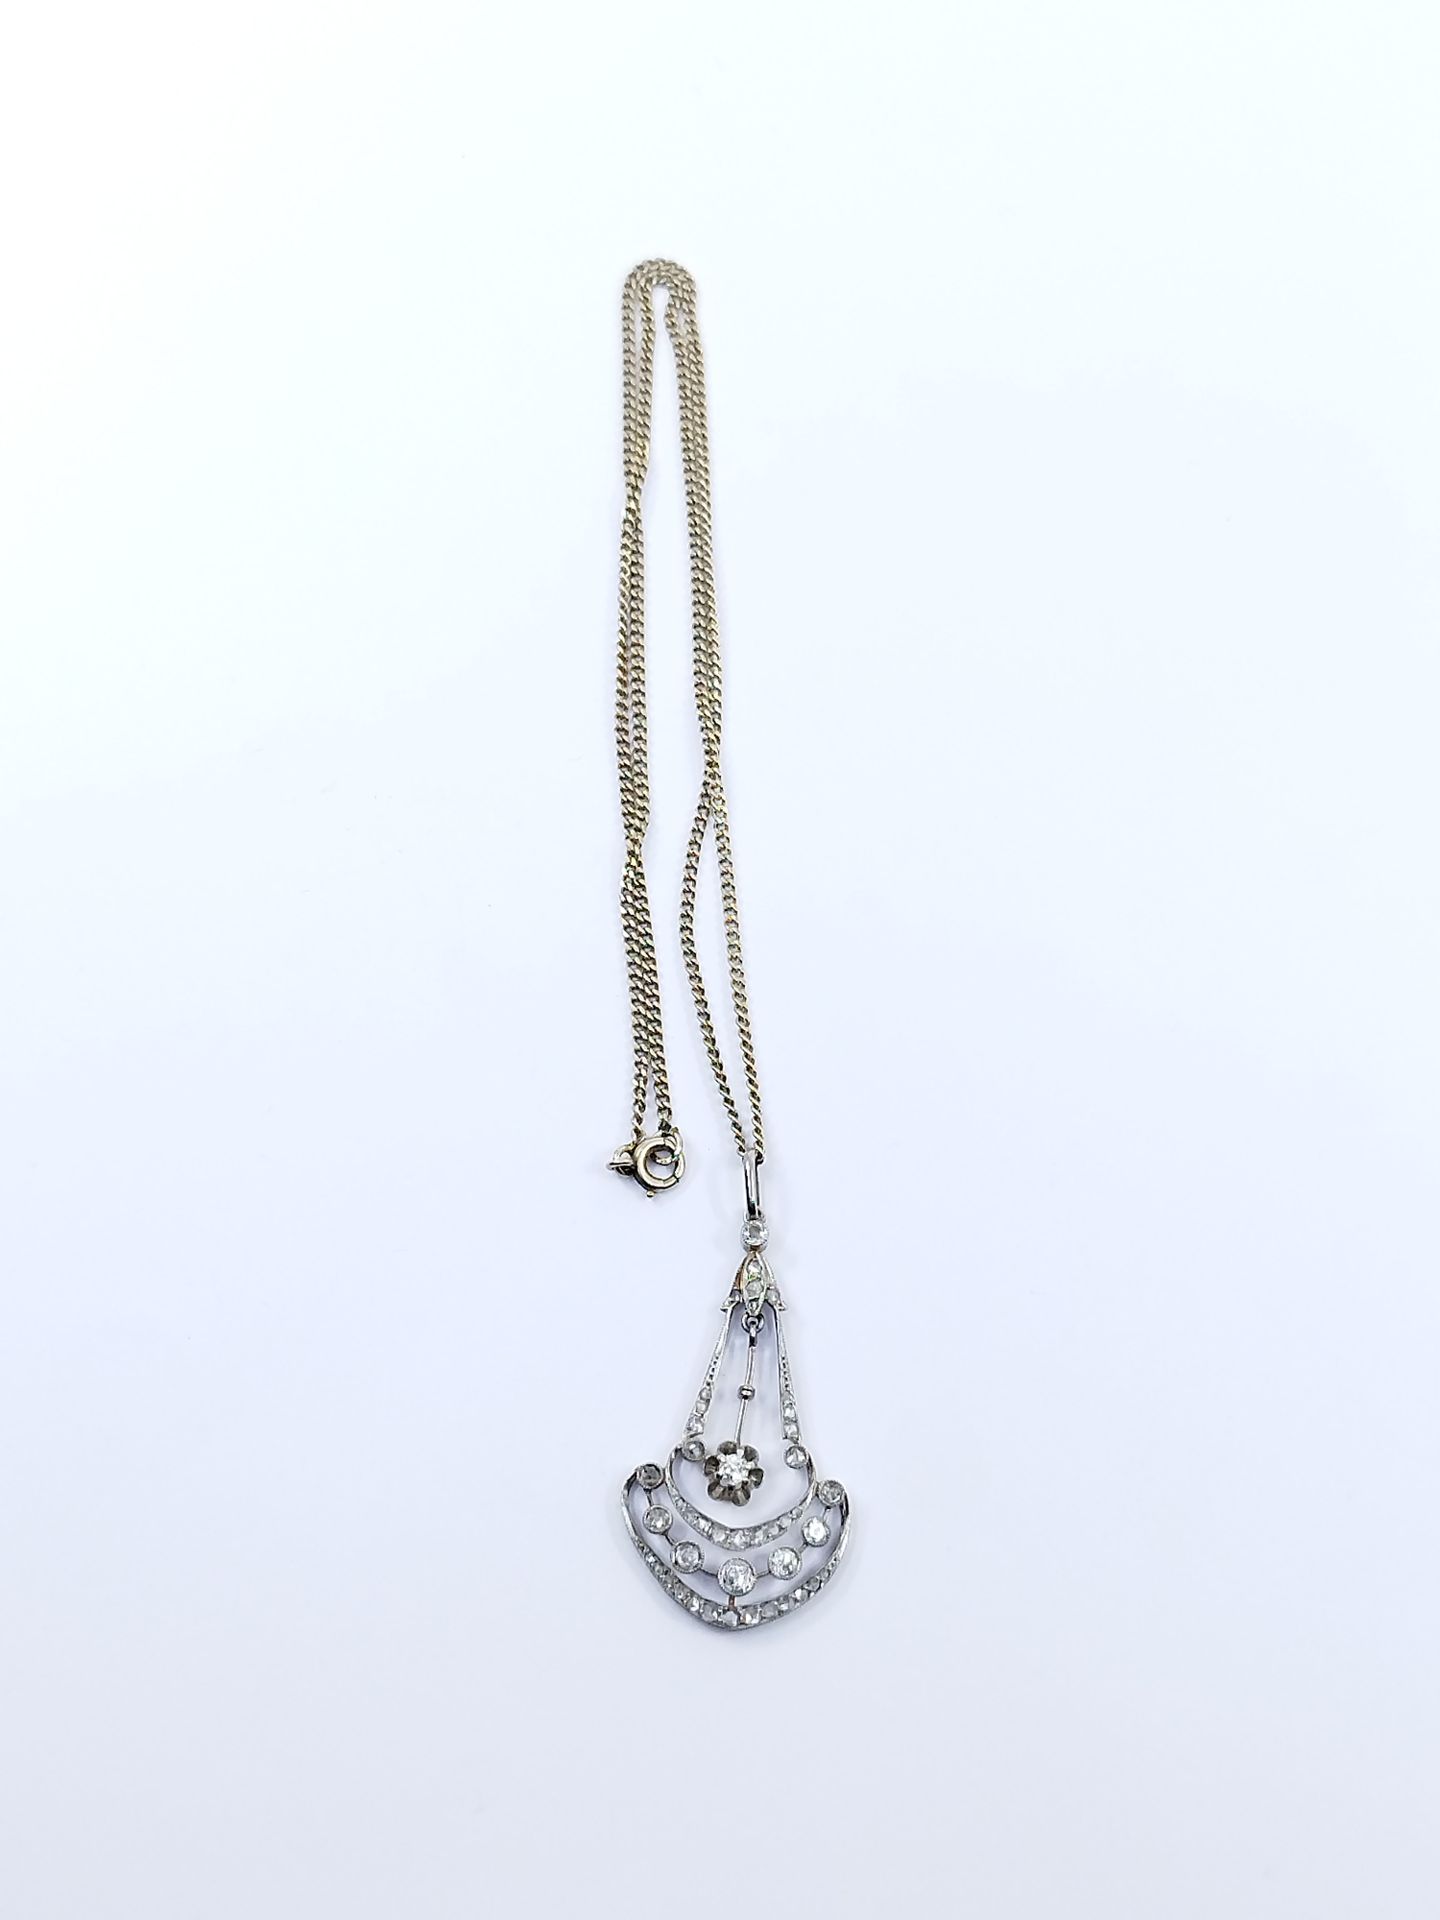 Null PENDANT and its chain in white gold 750

Pendant set with old cut and pink &hellip;